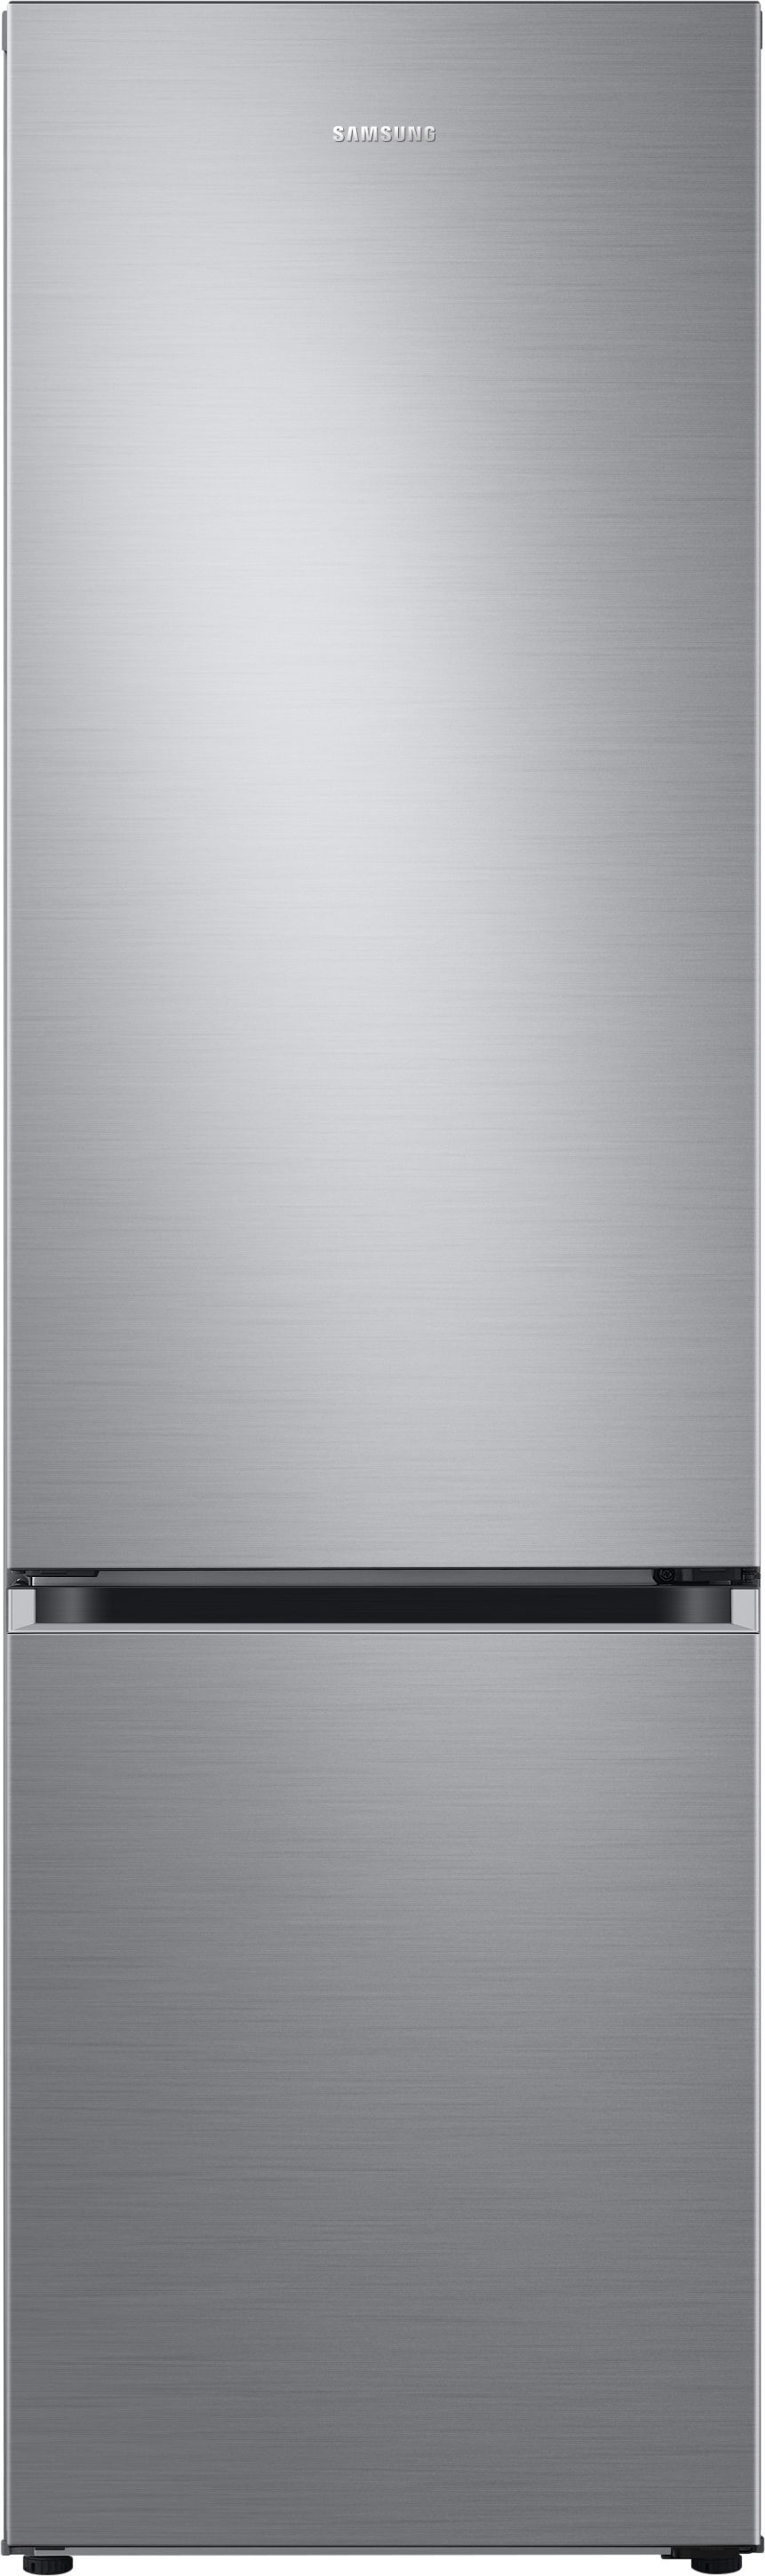 Samsung Series 5 RB38C602CS9 70/30 No Frost Fridge Freezer - Stainless Steel - C Rated, Stainless Steel